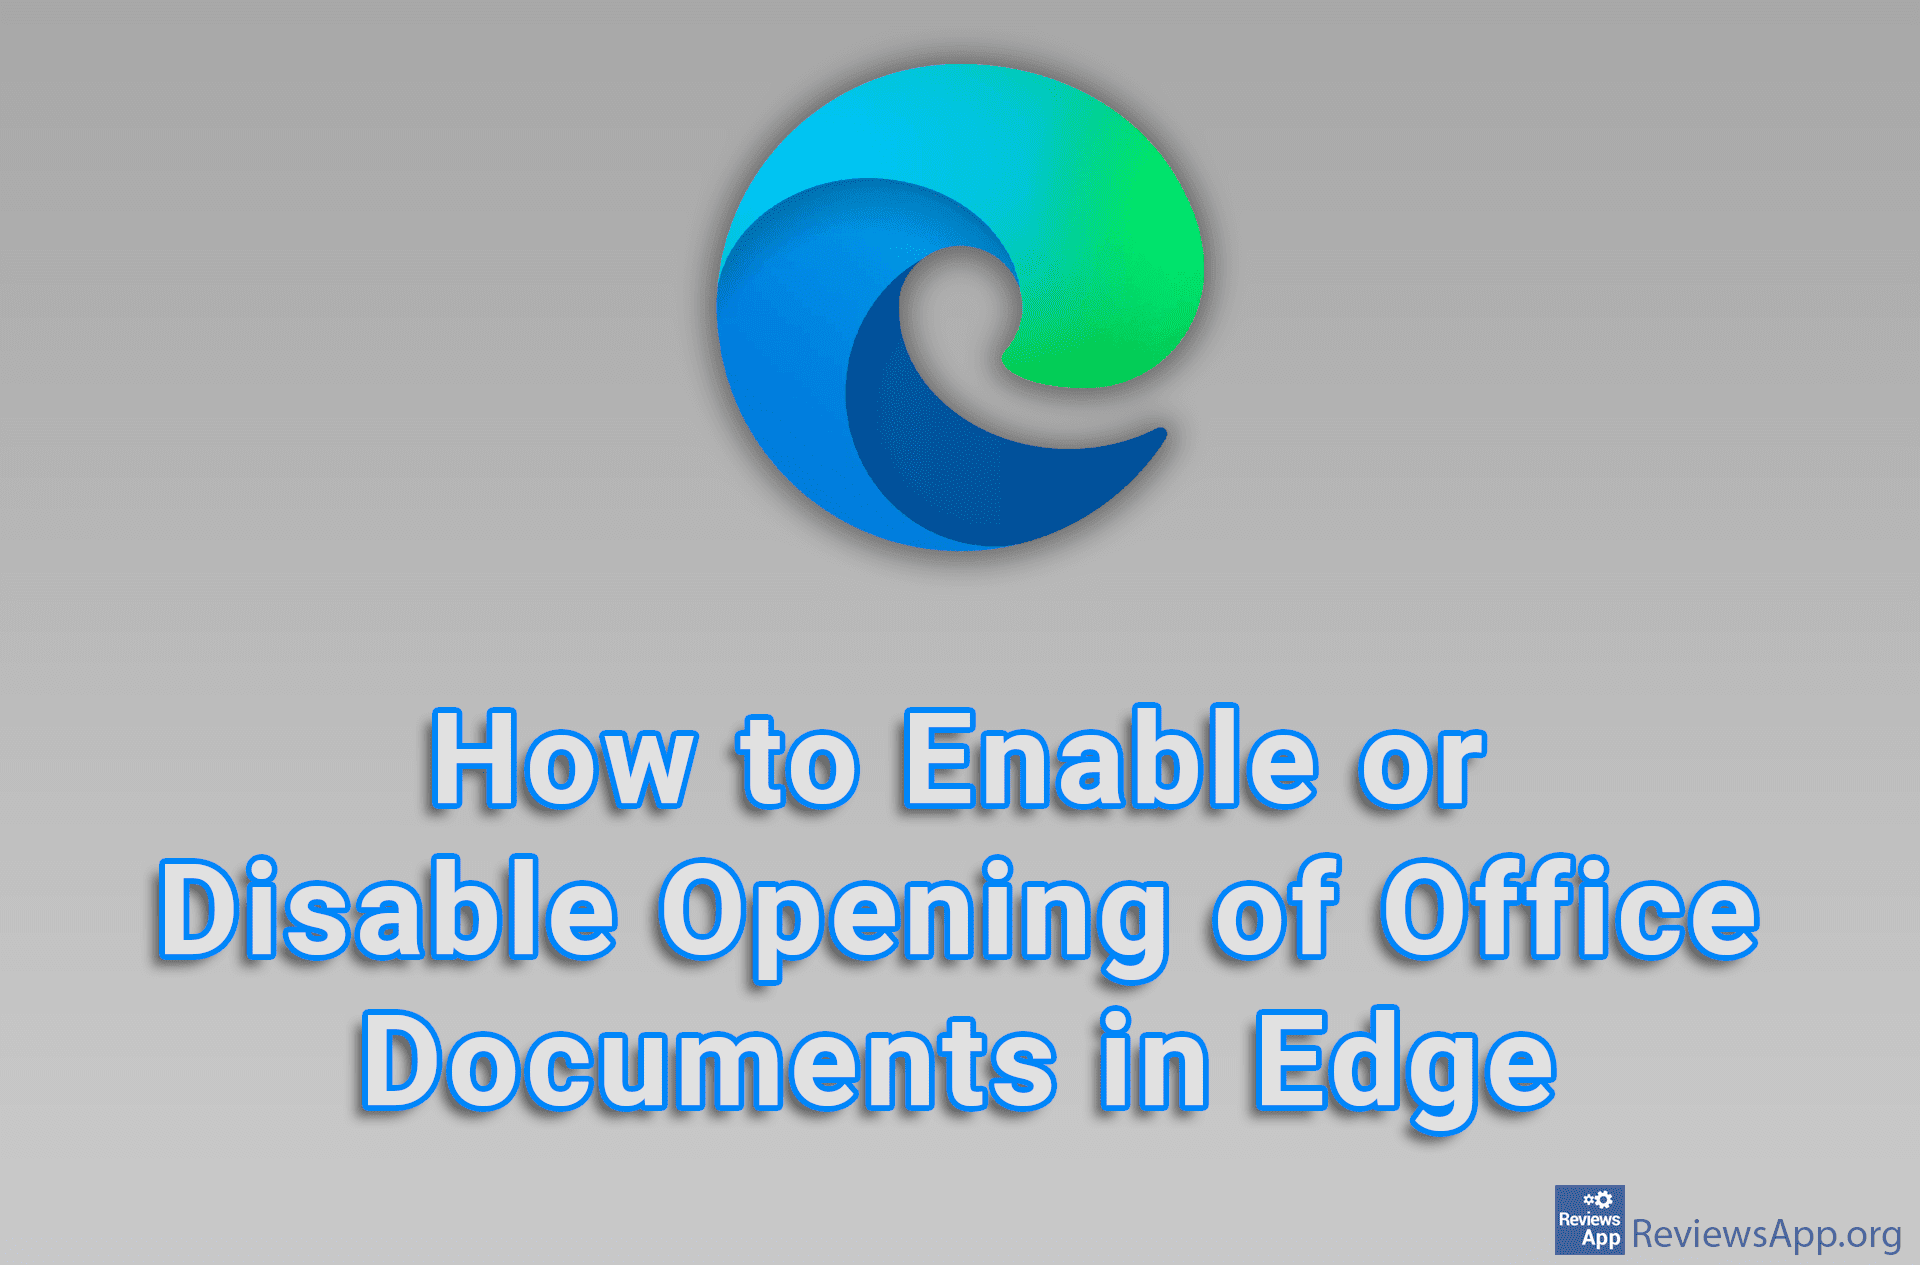 How to Enable or Disable Opening of Office Documents in Edge